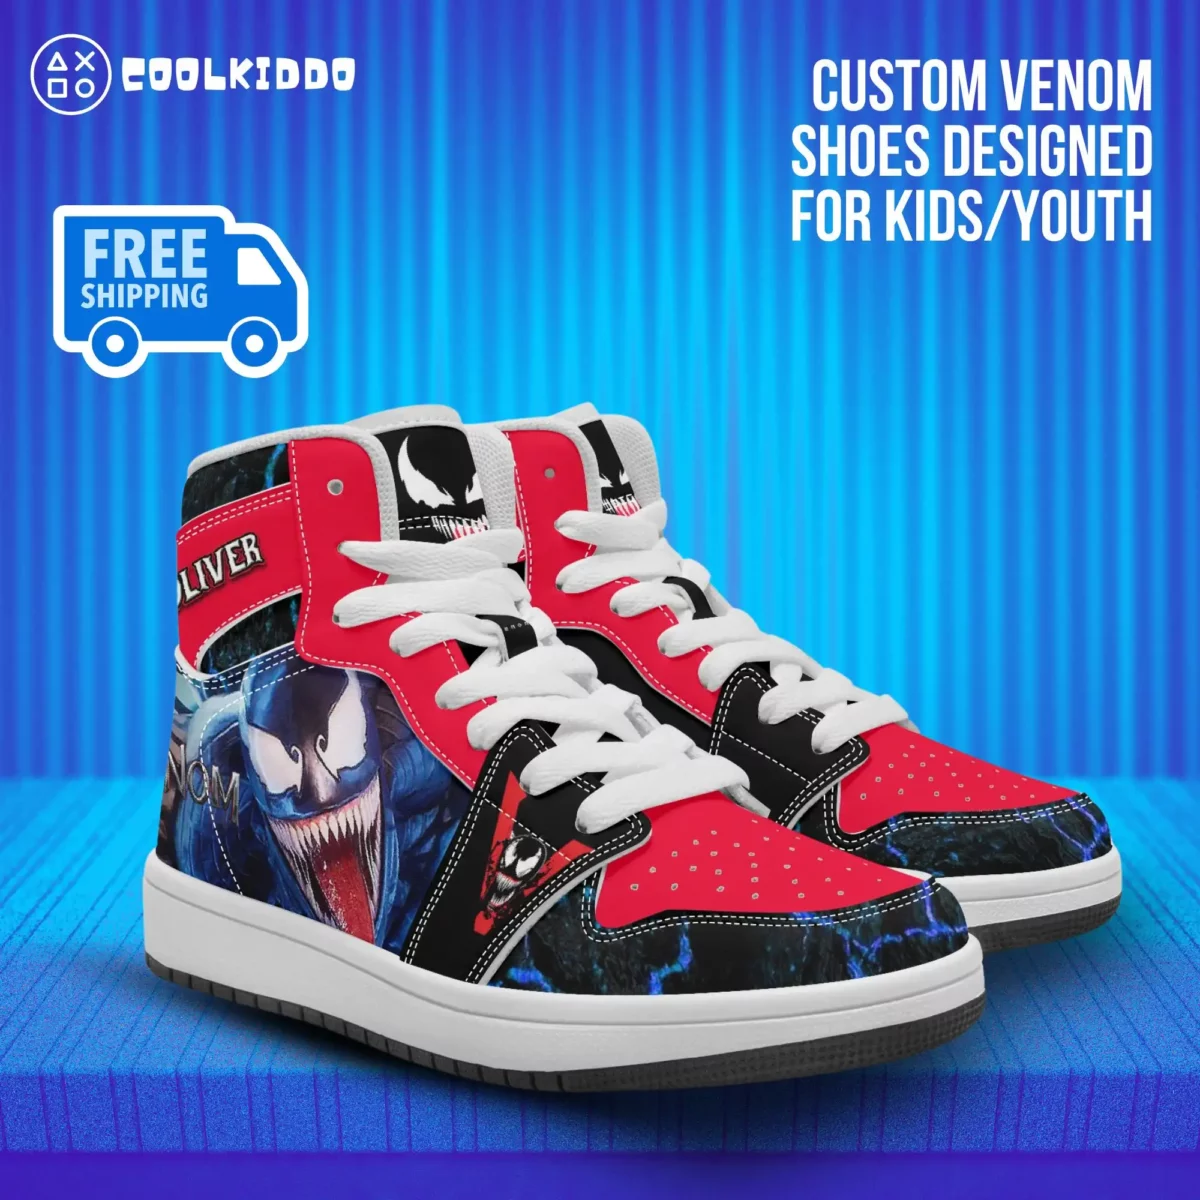 Personalized Venom Character High-Top Leather Children/Youth Shoes Cool Kiddo 10